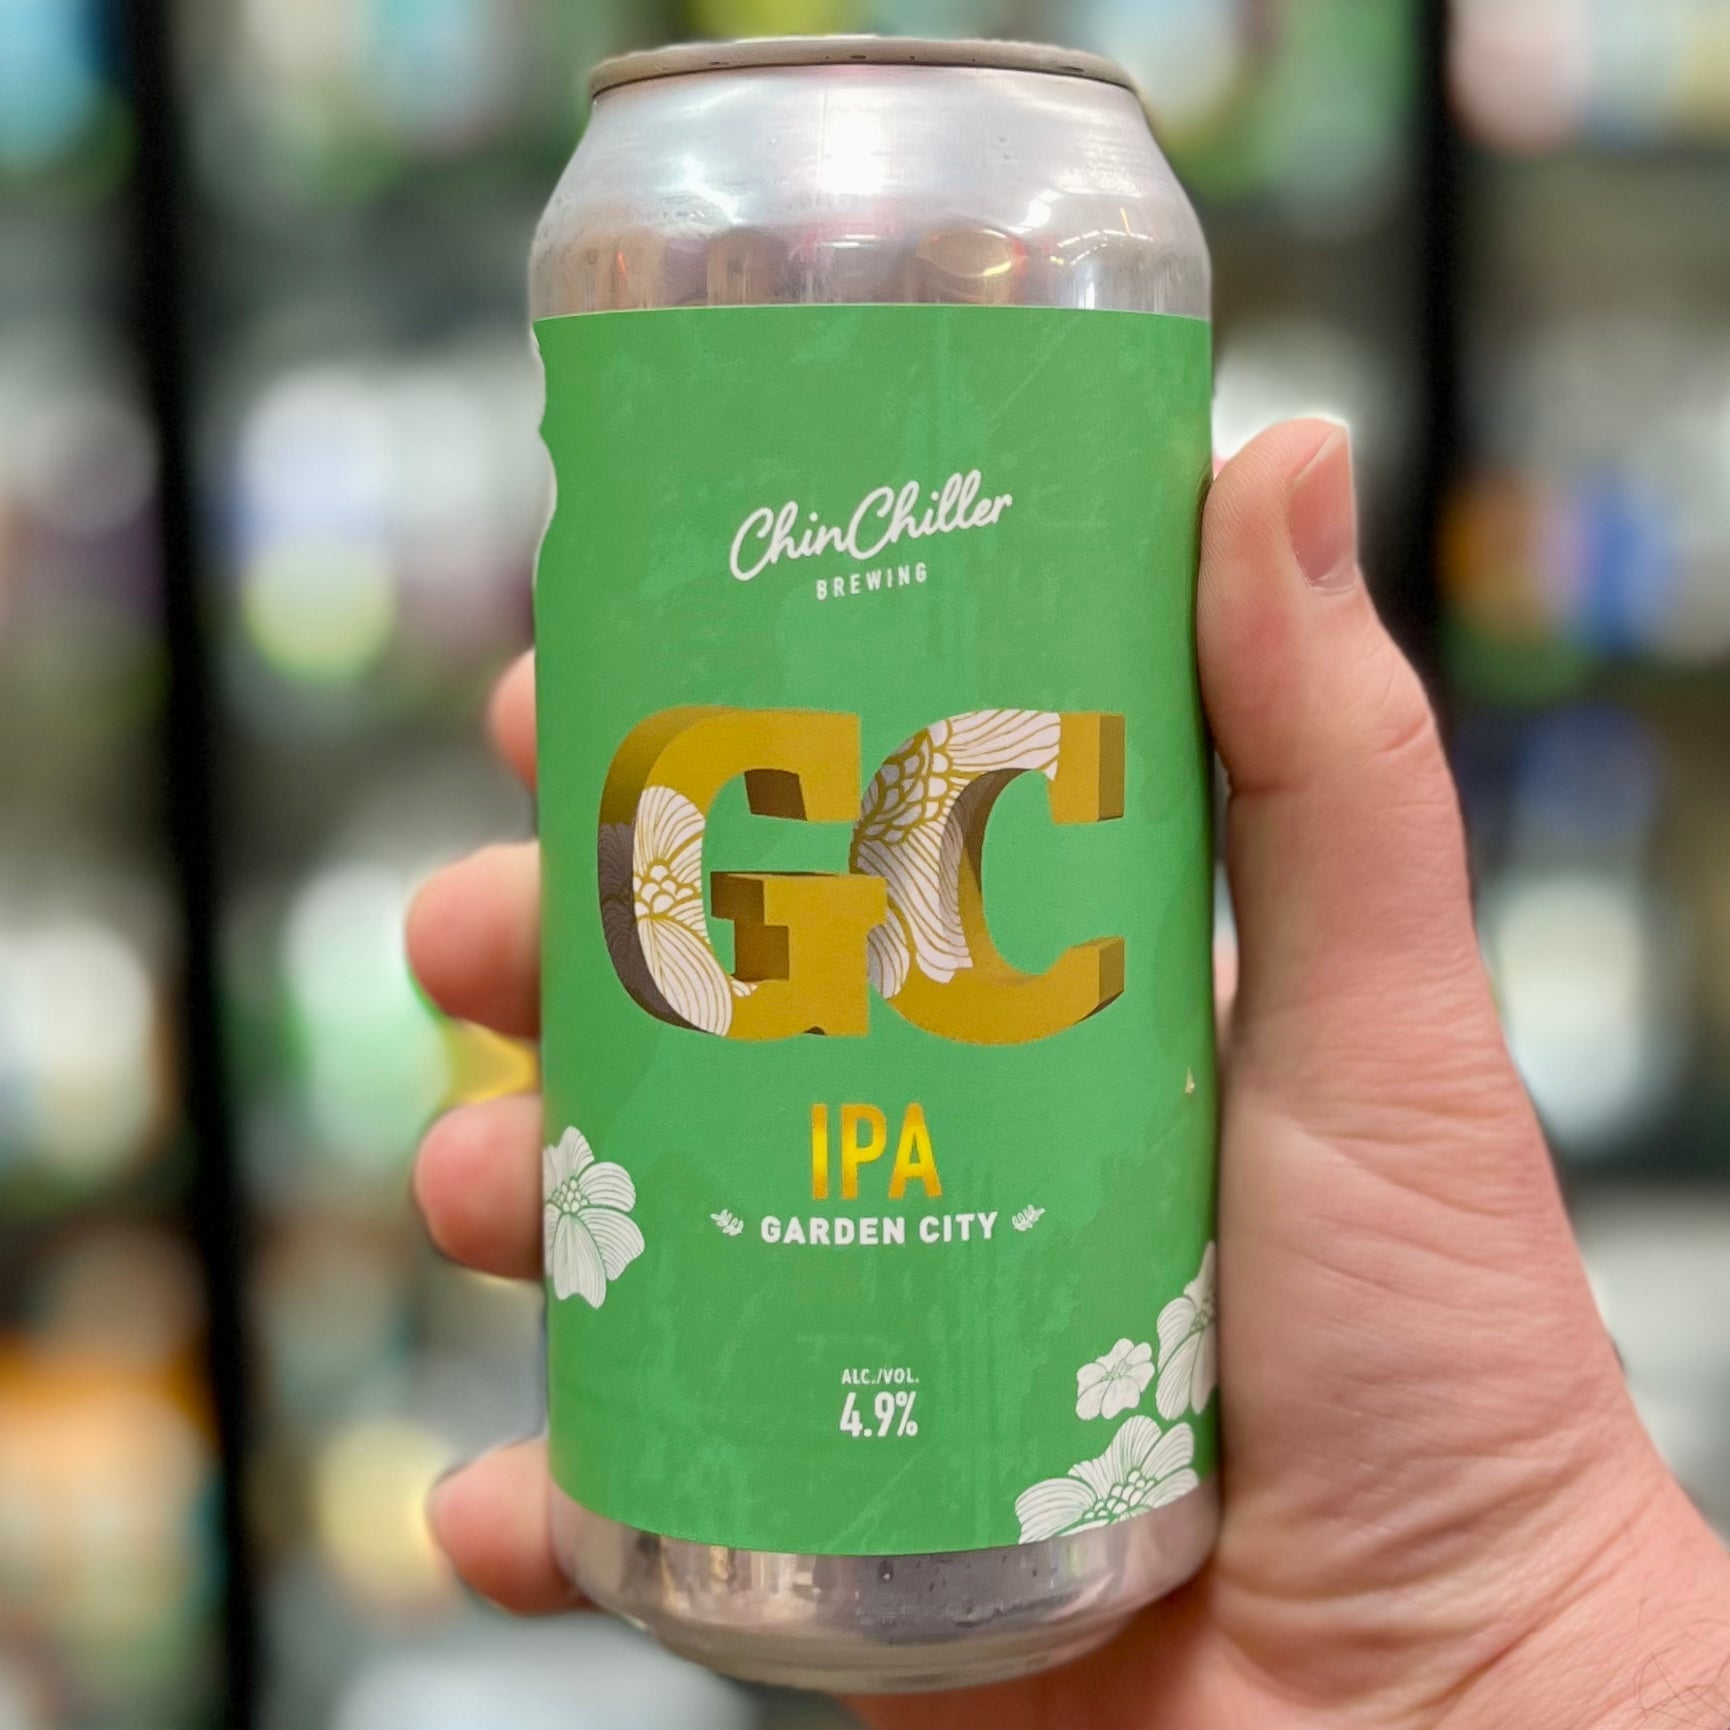 ChinChiller Brewing GC (Garden City) IPA IPA - The Beer Library